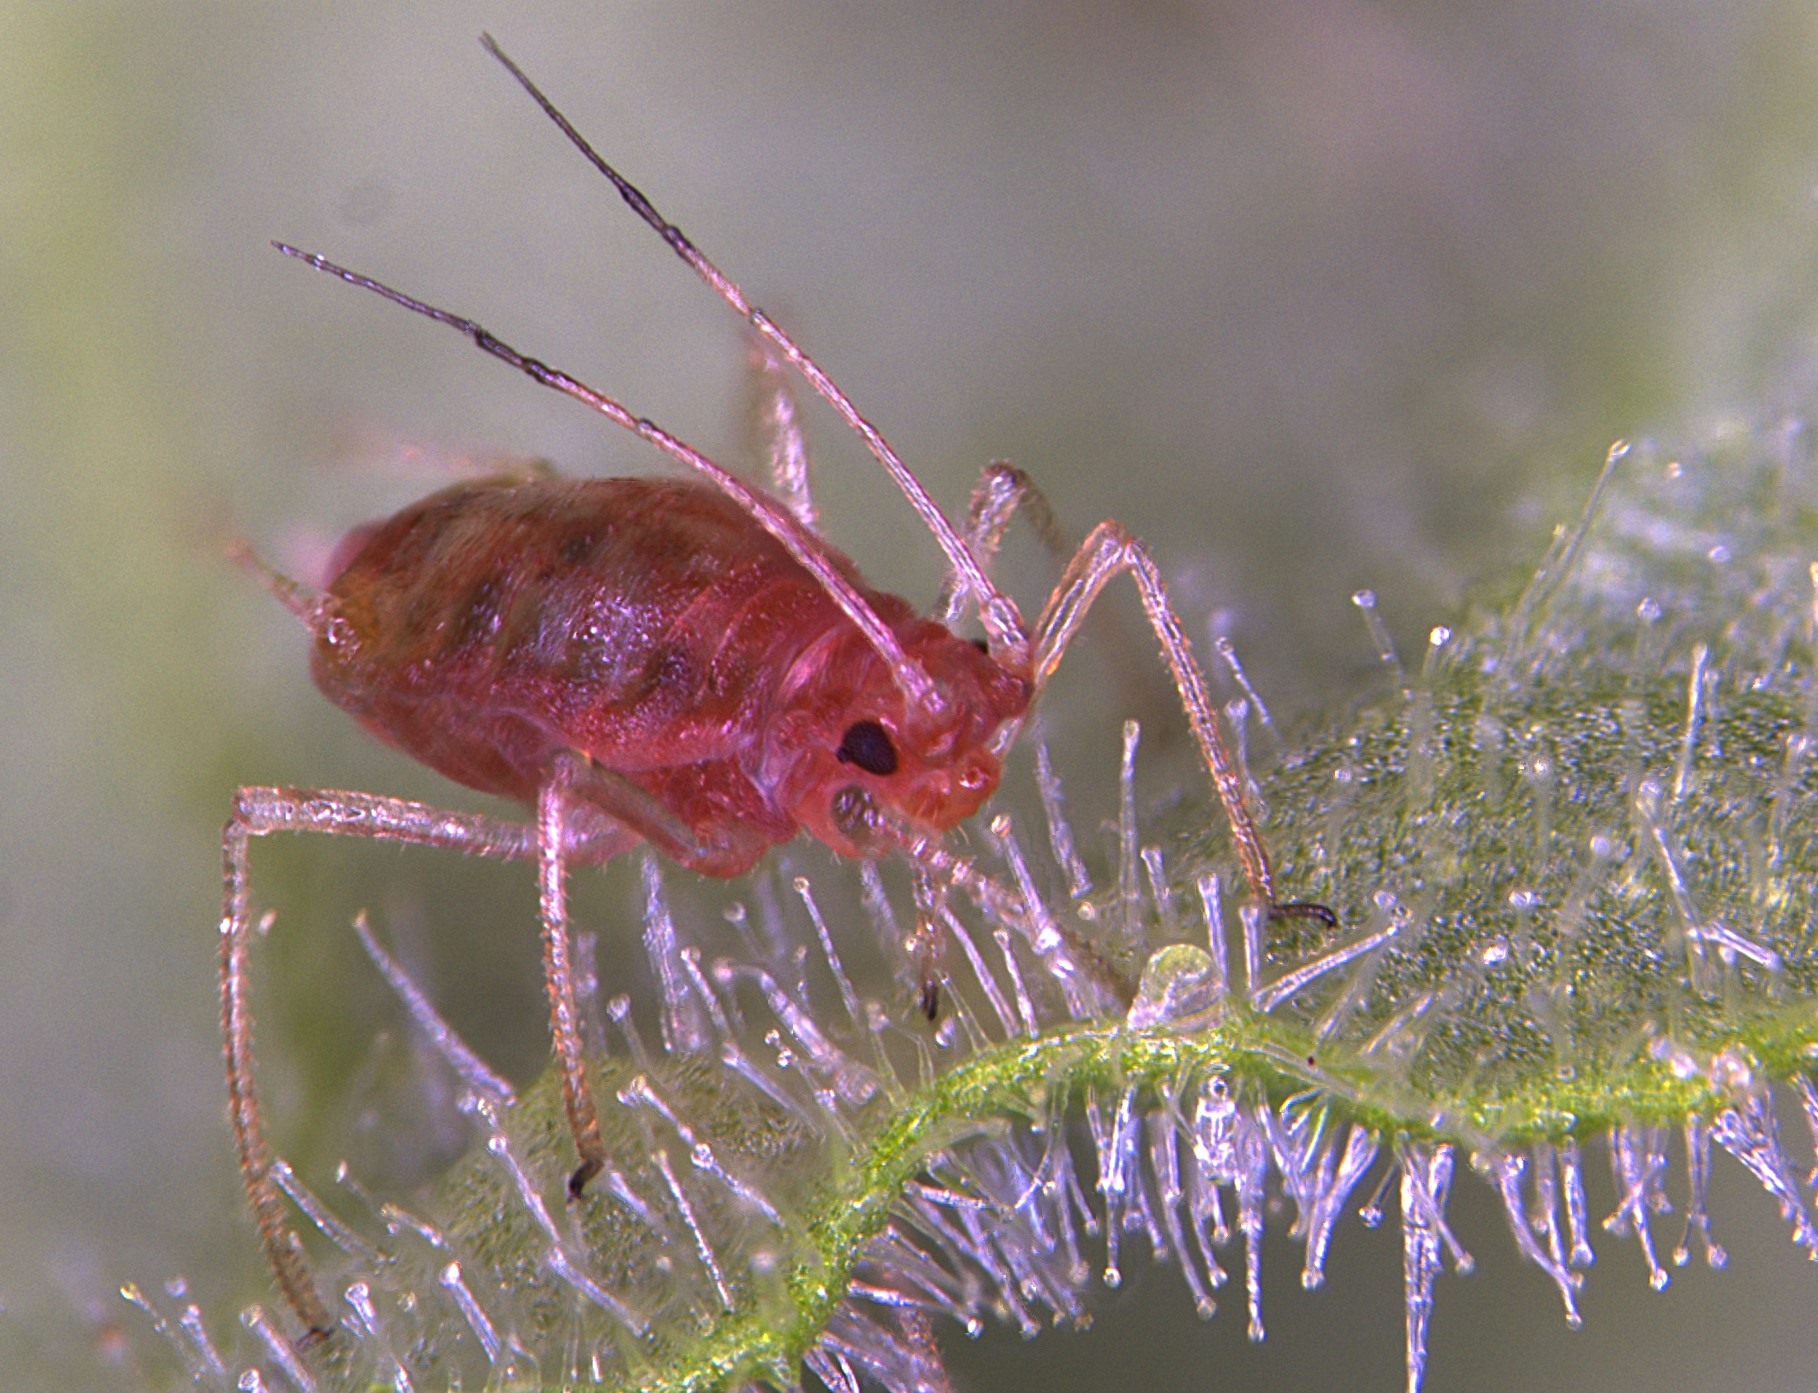 A red aphid among the microscopic trichomes of a leaf.